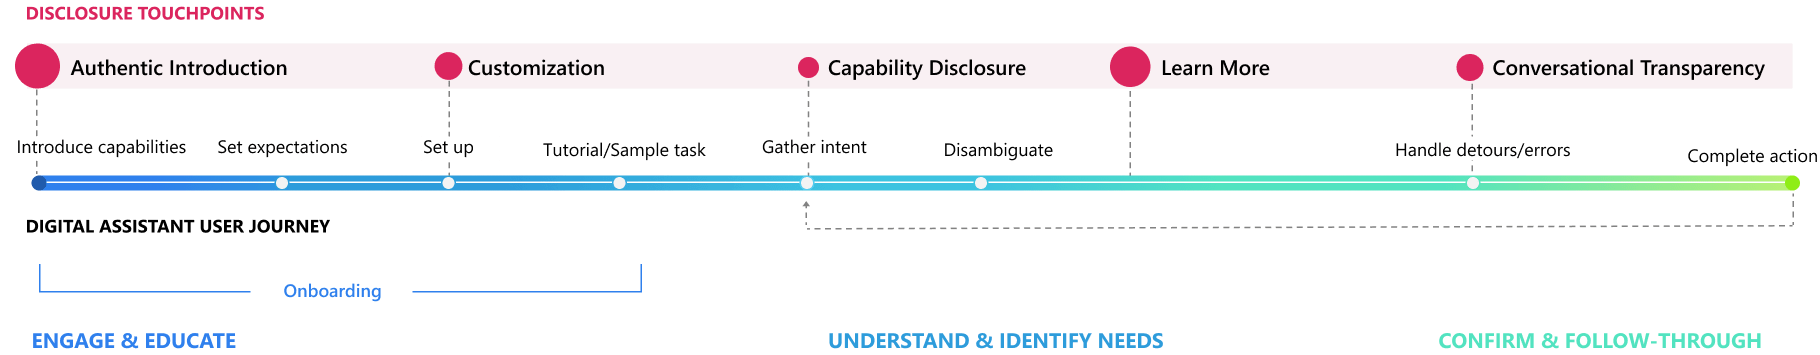 Disclosure opportunities throughout a user journey